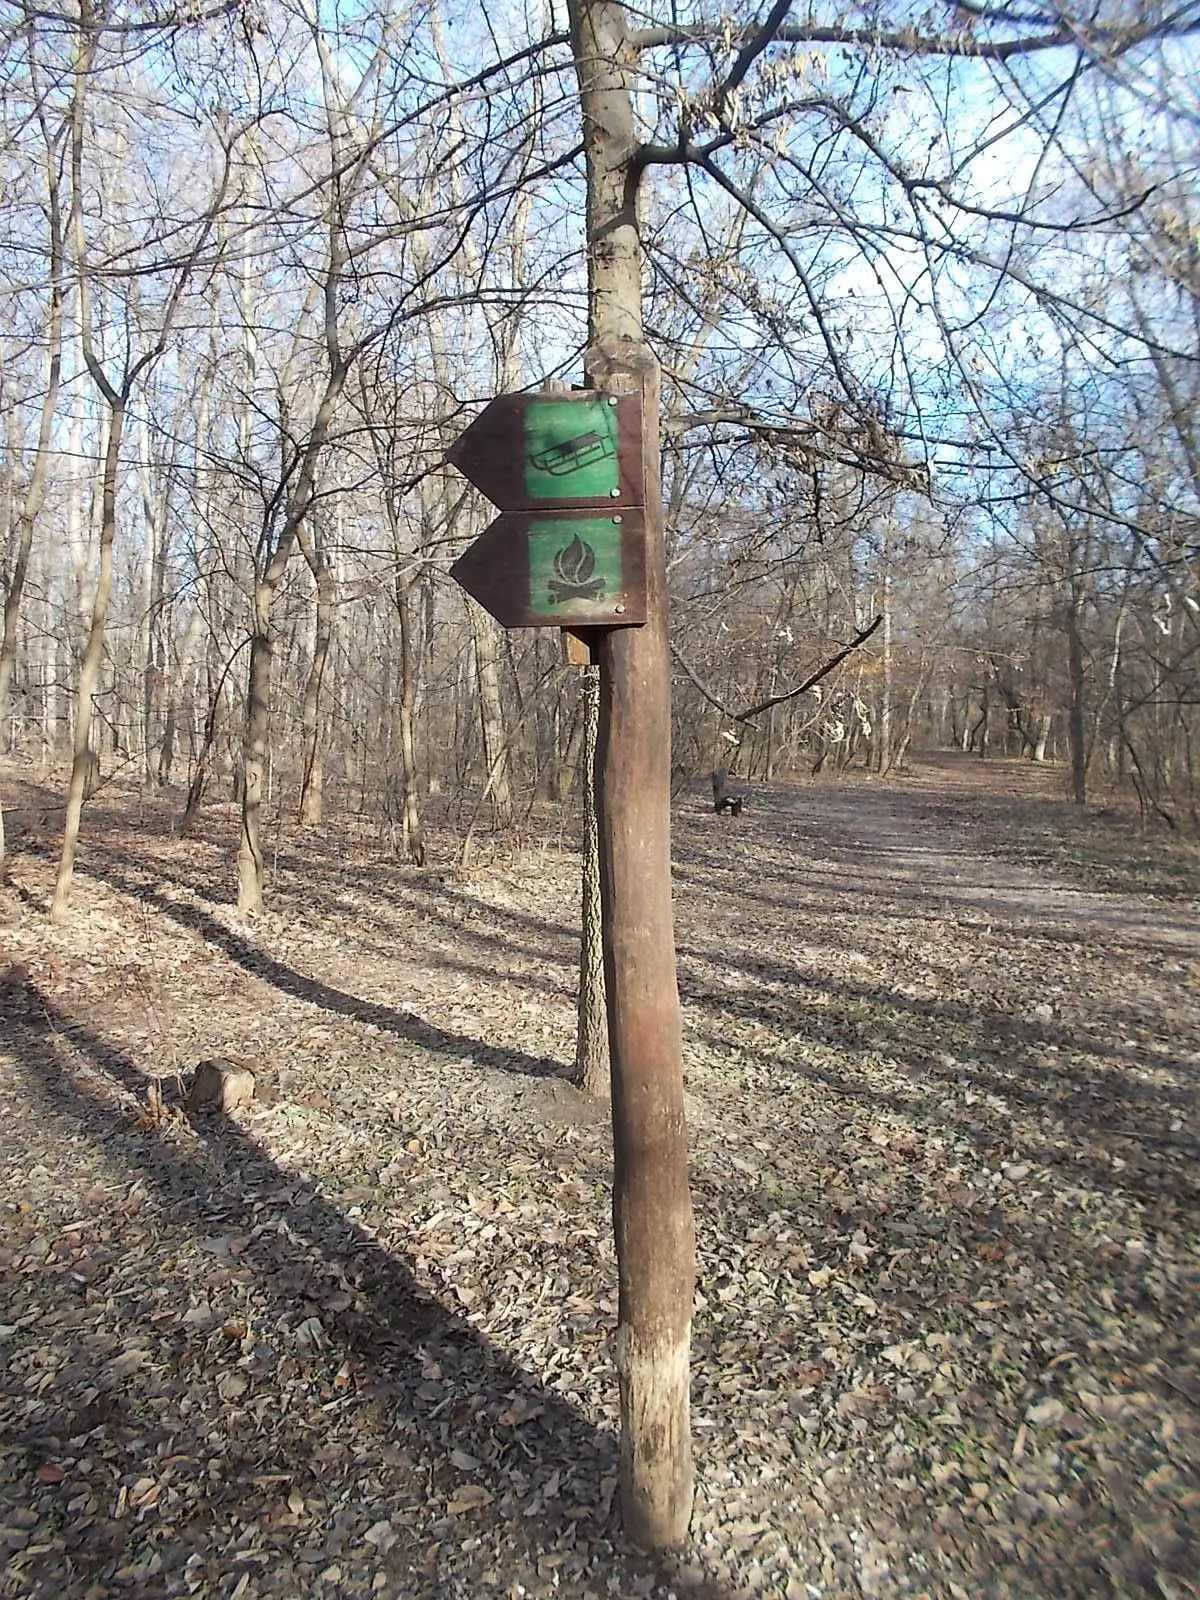 Photo showing: : Assigned campfire site and sled tack/site signs in Páskomligeti parkerdő (Páskomliget parkforest) or Kiserdő (Small forest) Part of the Pilis Parkerdő. - Szentmihályi út off, 15th district of Budapest.